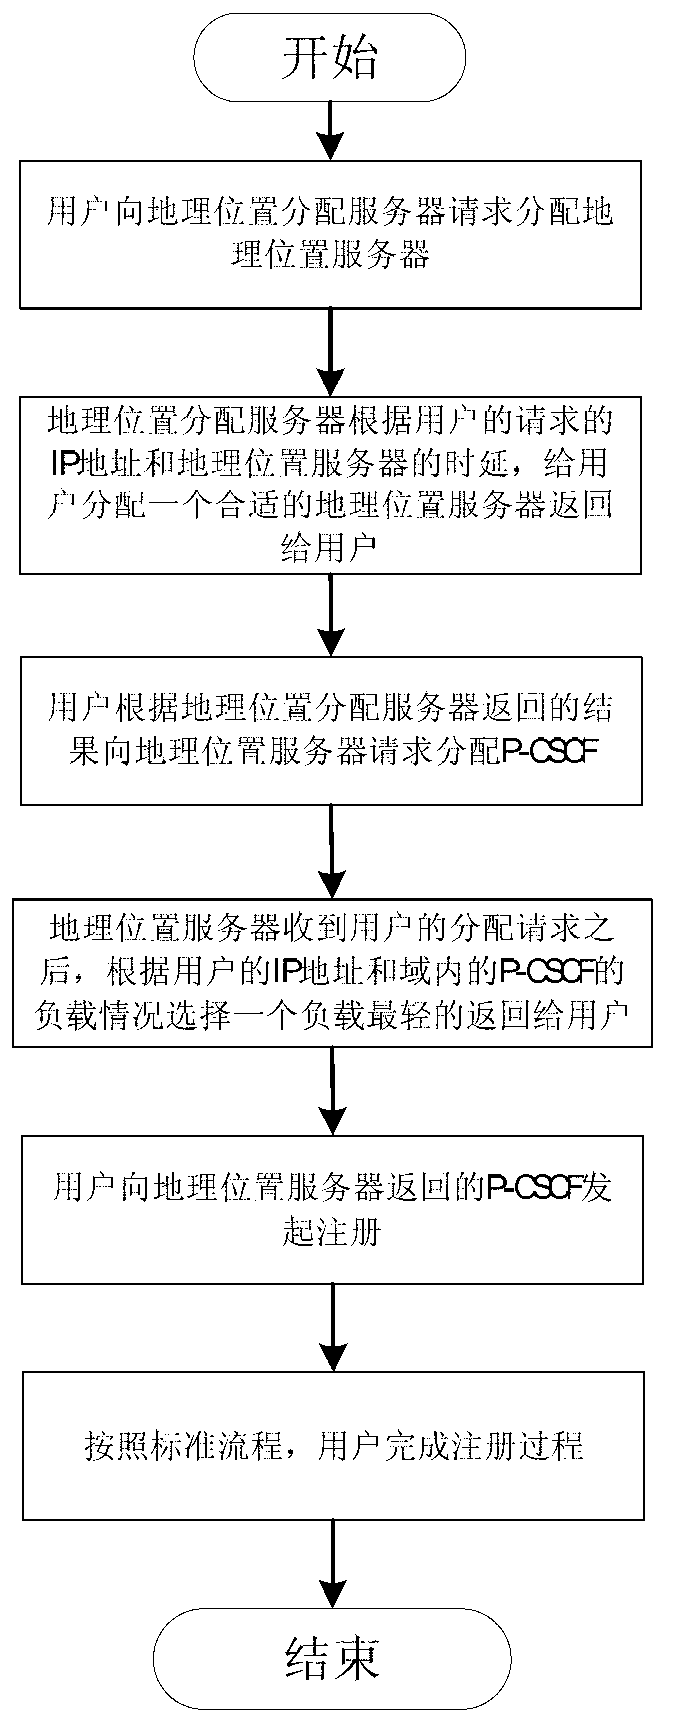 P-CSCF distribution method based on geographical position and load balancing